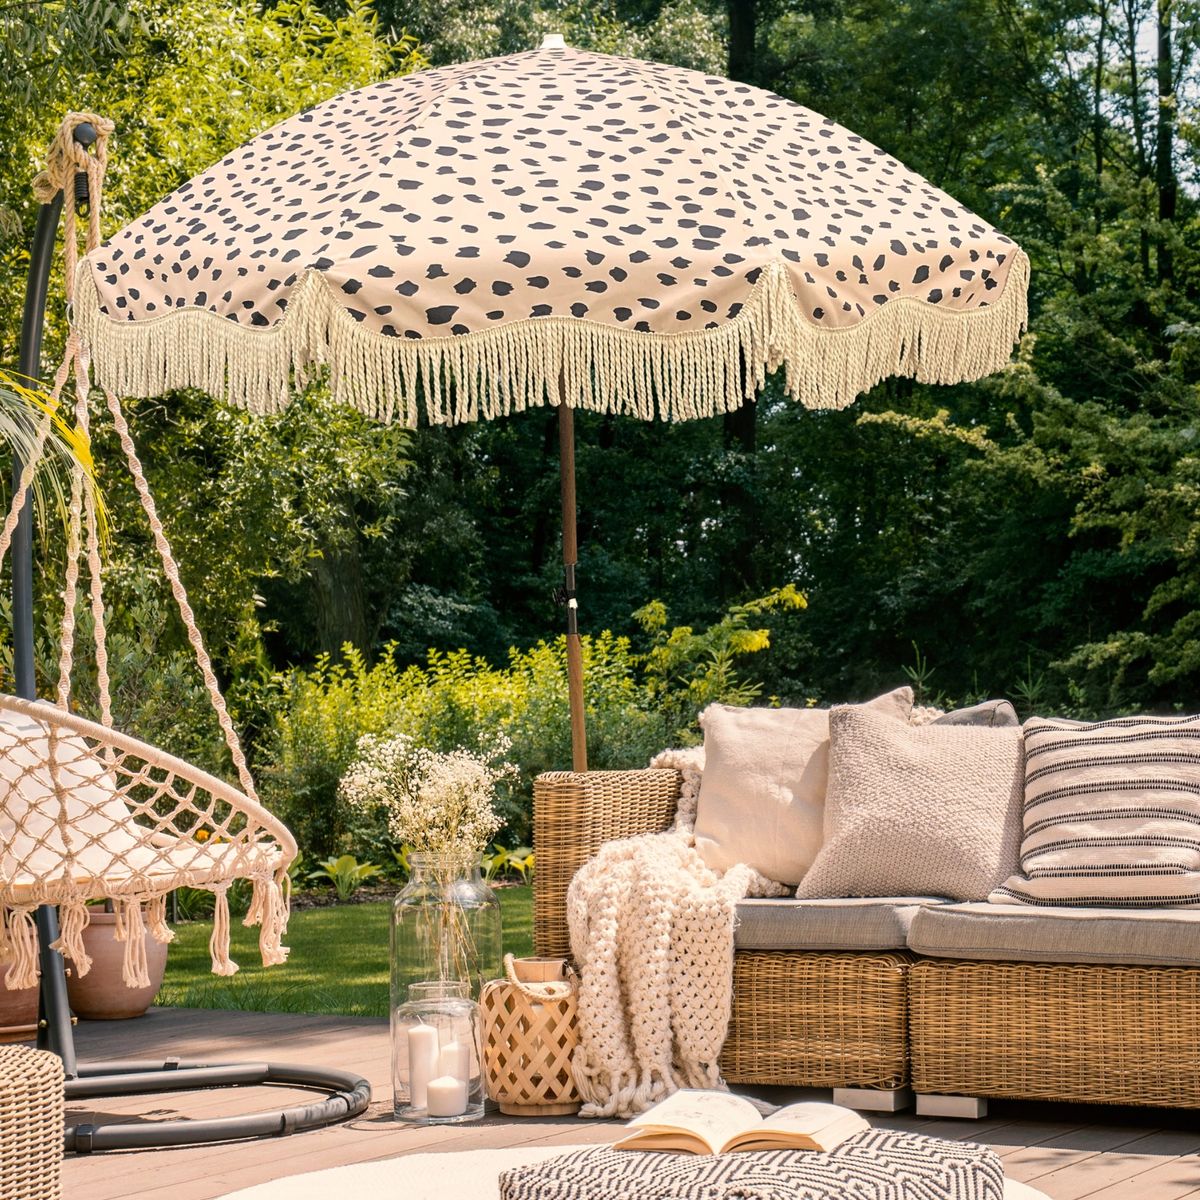 Ecru with Black Spot Large Tassel Fringed Beach and Garden Parasol - Back  in stock 1st week